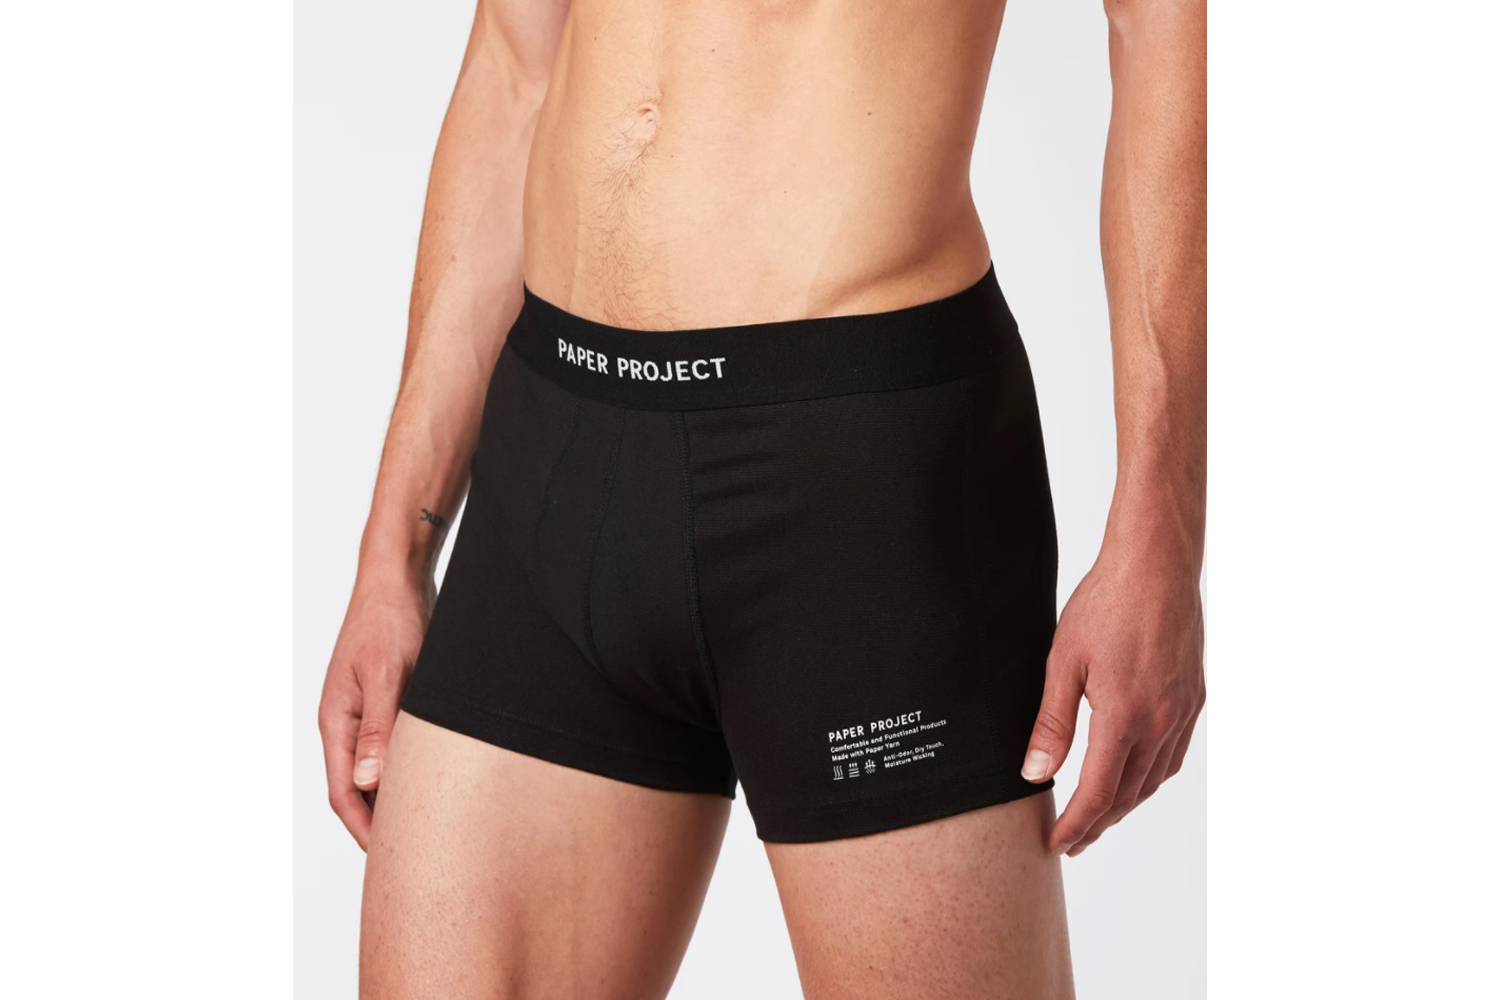 The best boxer briefs for men looking for both comfort and style